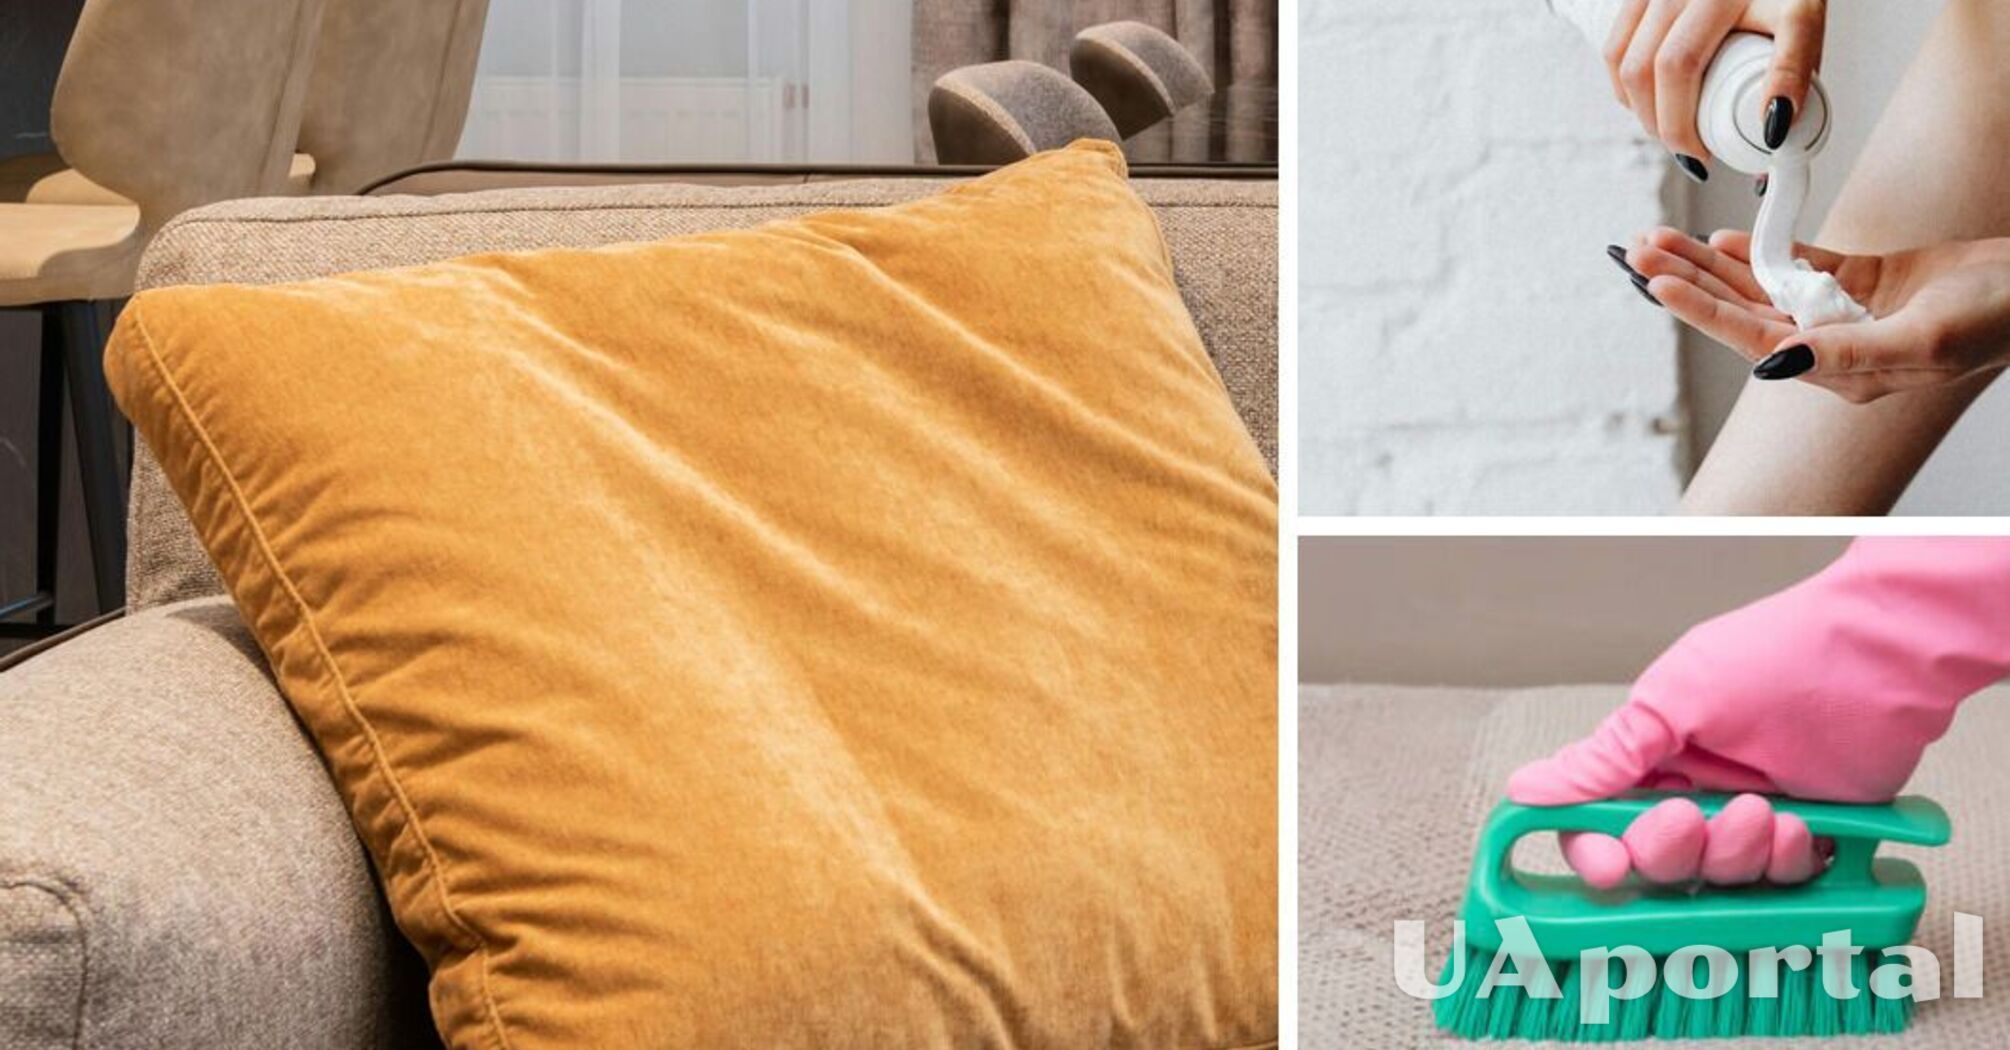 Cheap ways to clean your sofa from stains: you need shaving foam and a pot lid